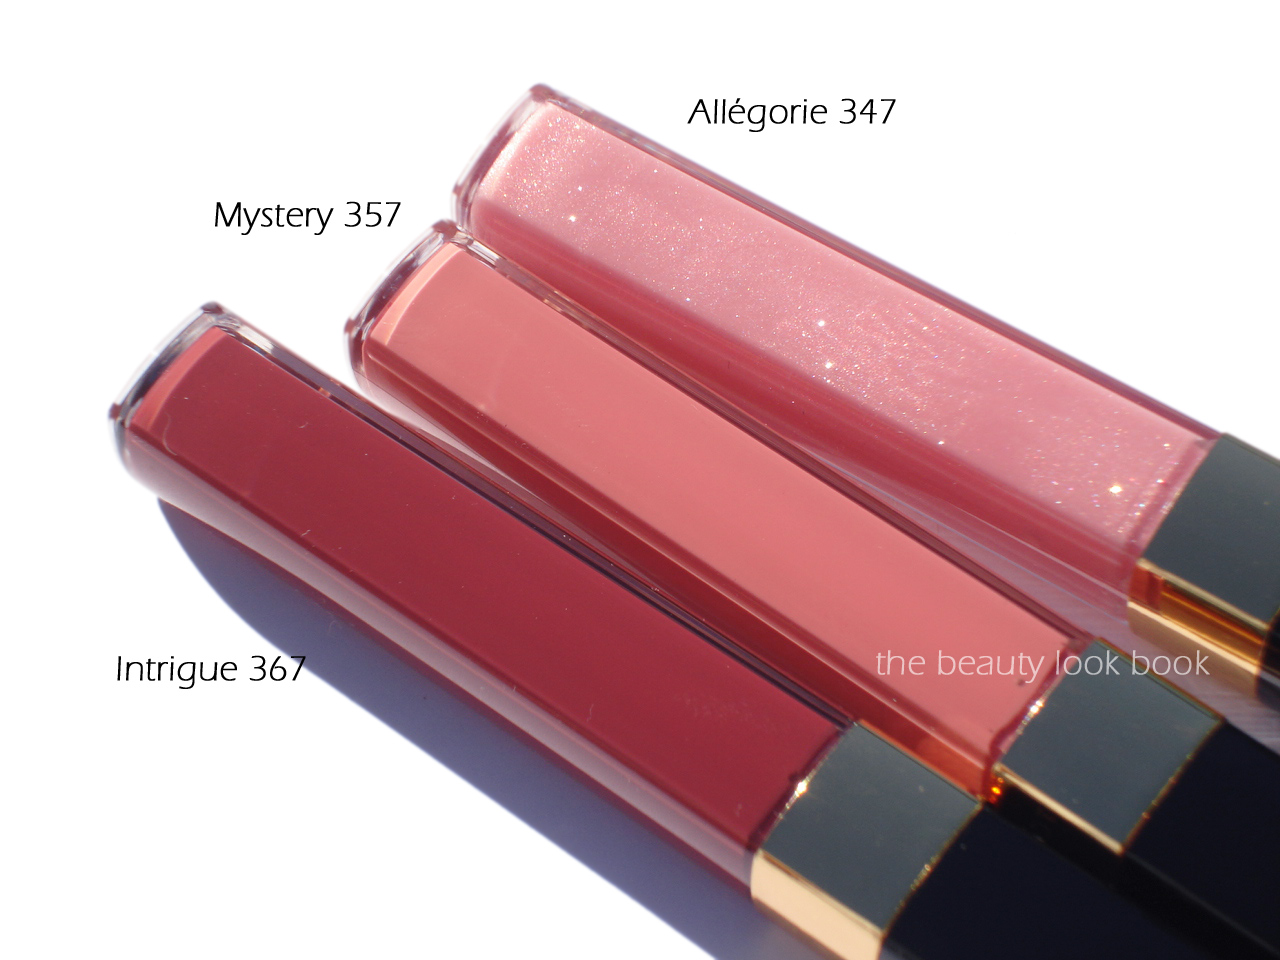 Chanel Holiday 2012 Glossimers: Allégorie 347, Mystery 357, Intrigue 367 -  The Beauty Look Book